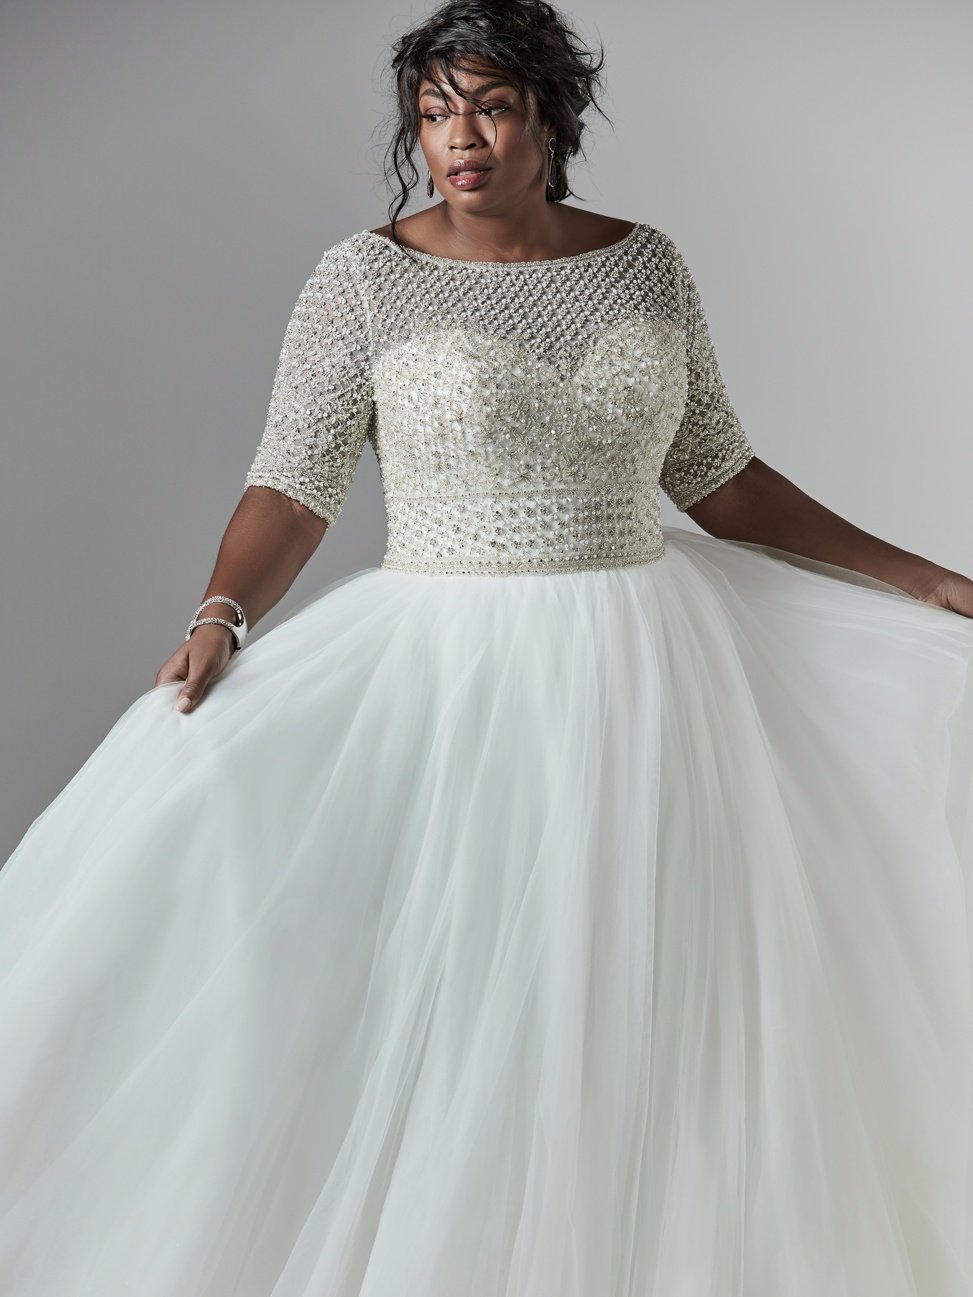 I Am Really Into These Plus Size Wedding Dresses